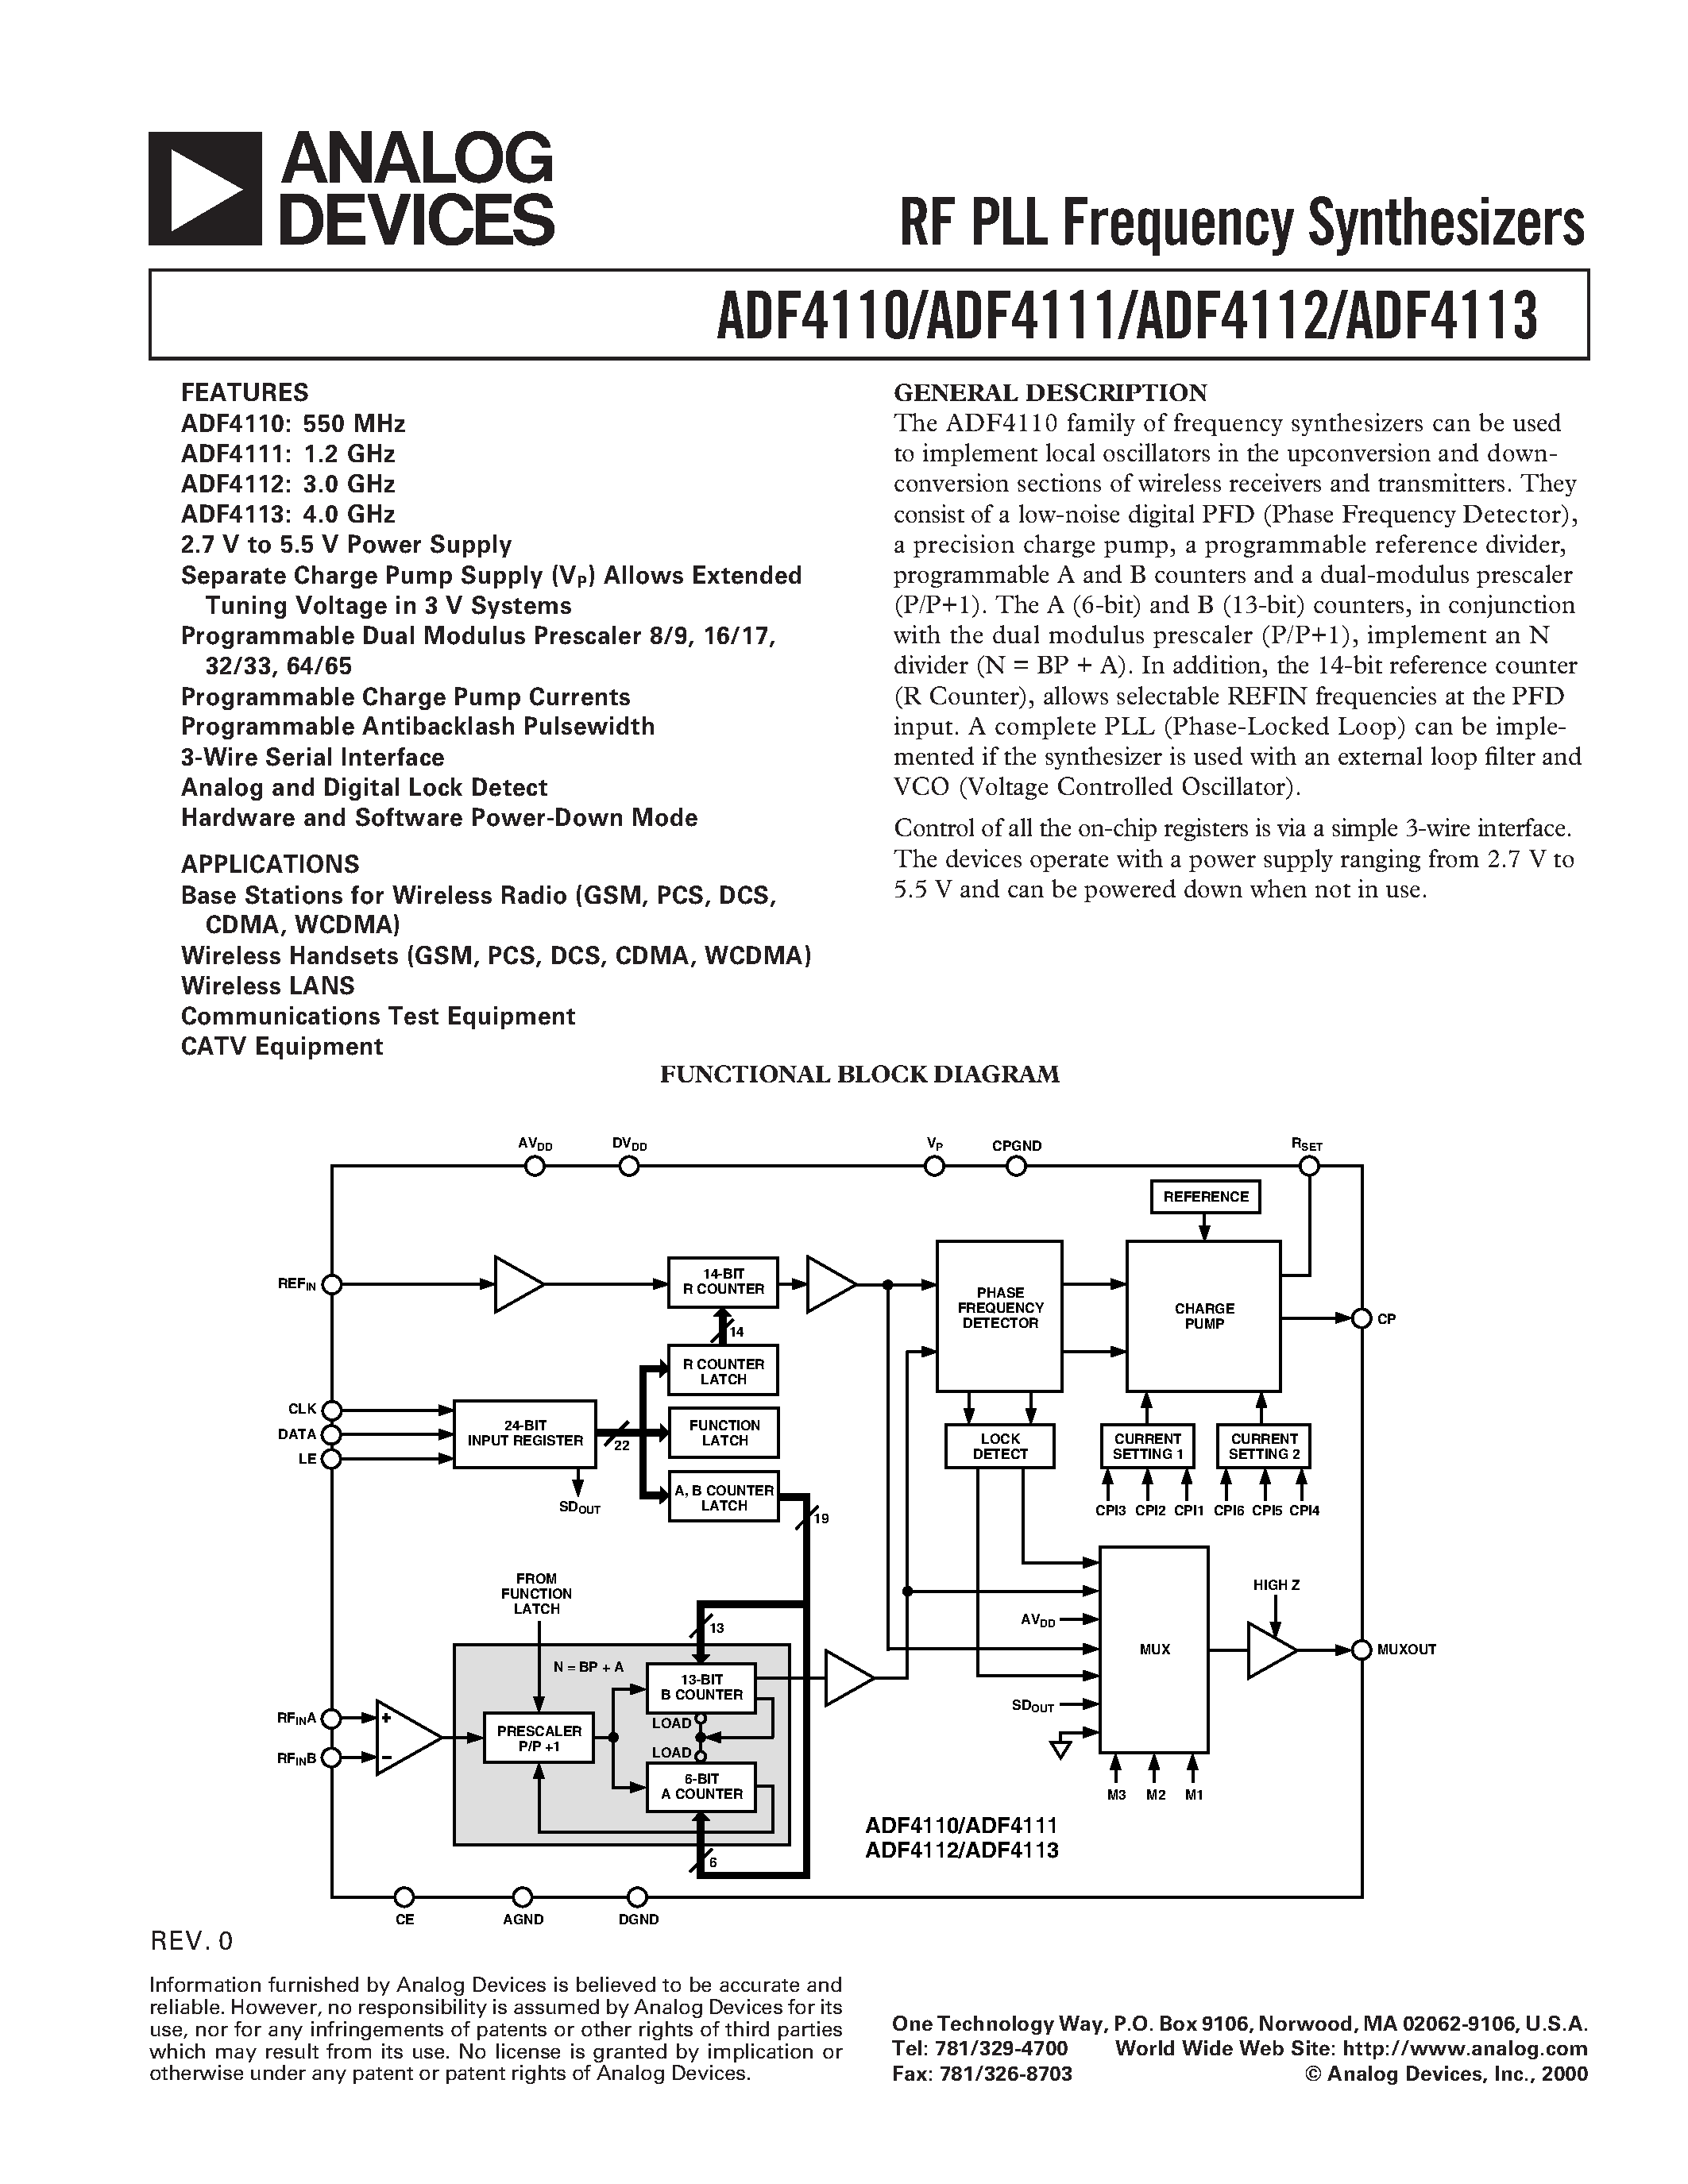 Даташит ADF4110BRU - RF PLL Frequency Synthesizers страница 1